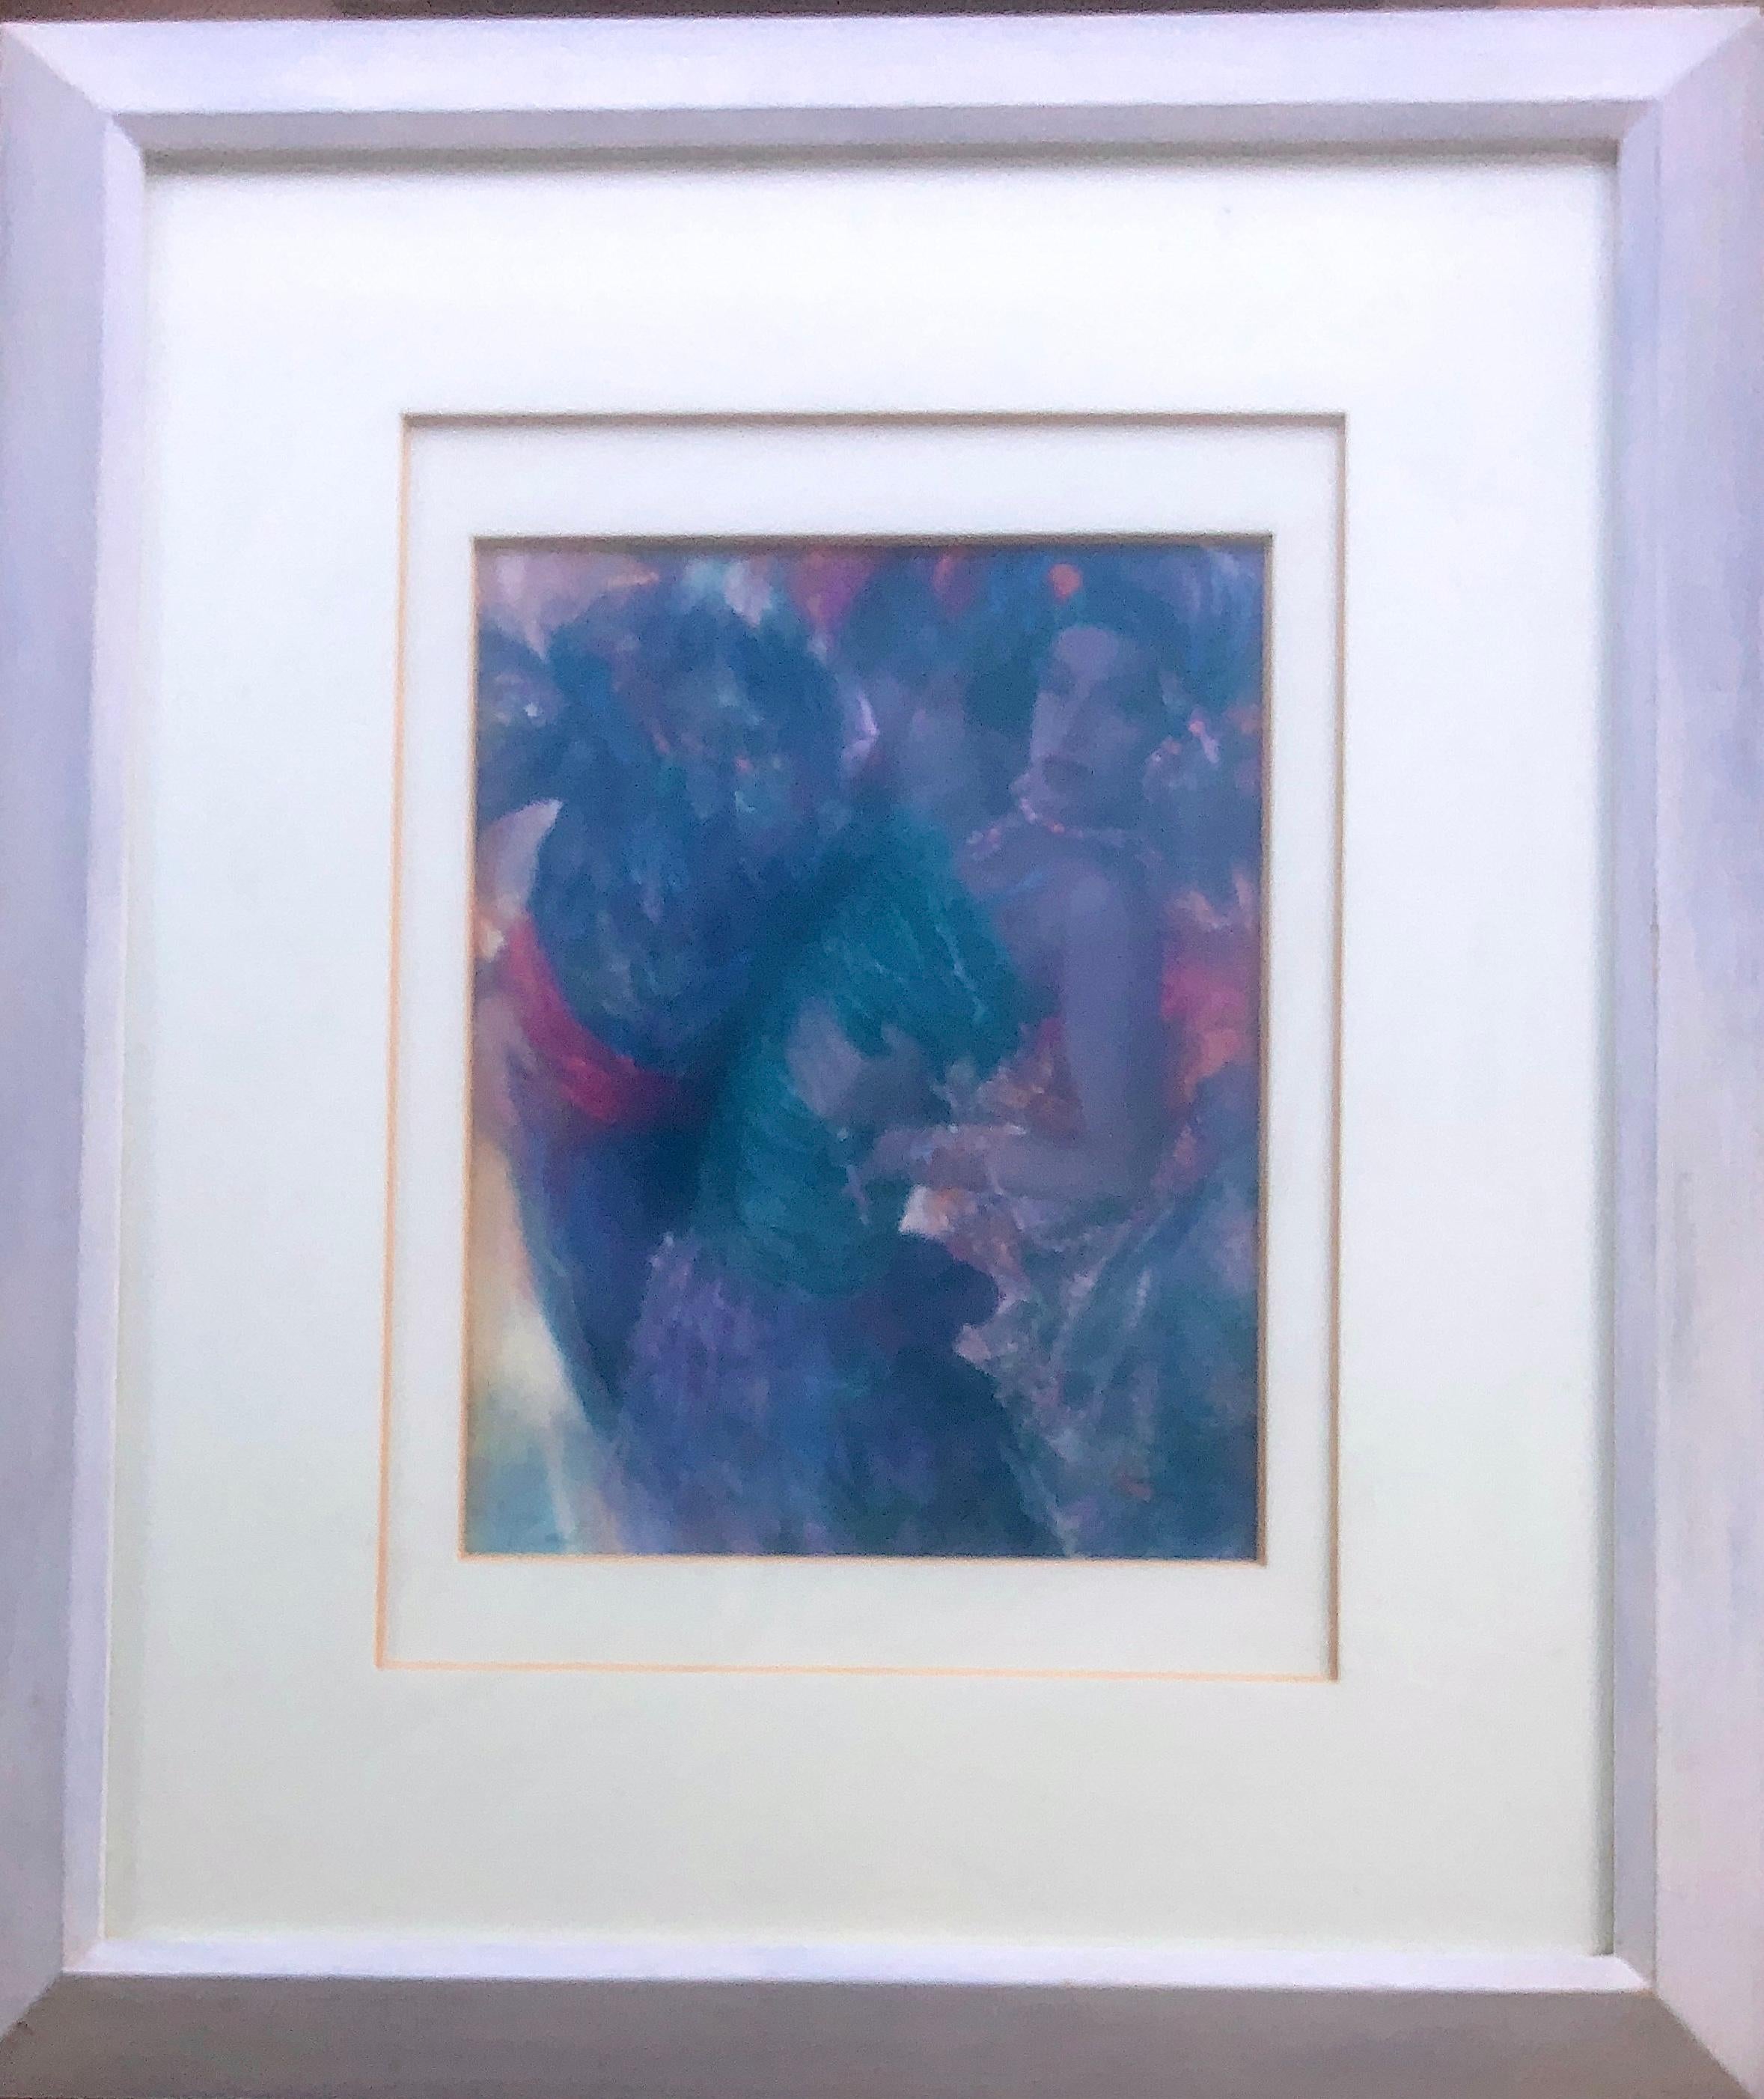 Spanish dancers pastel drawing - Painting by Pierre Caro